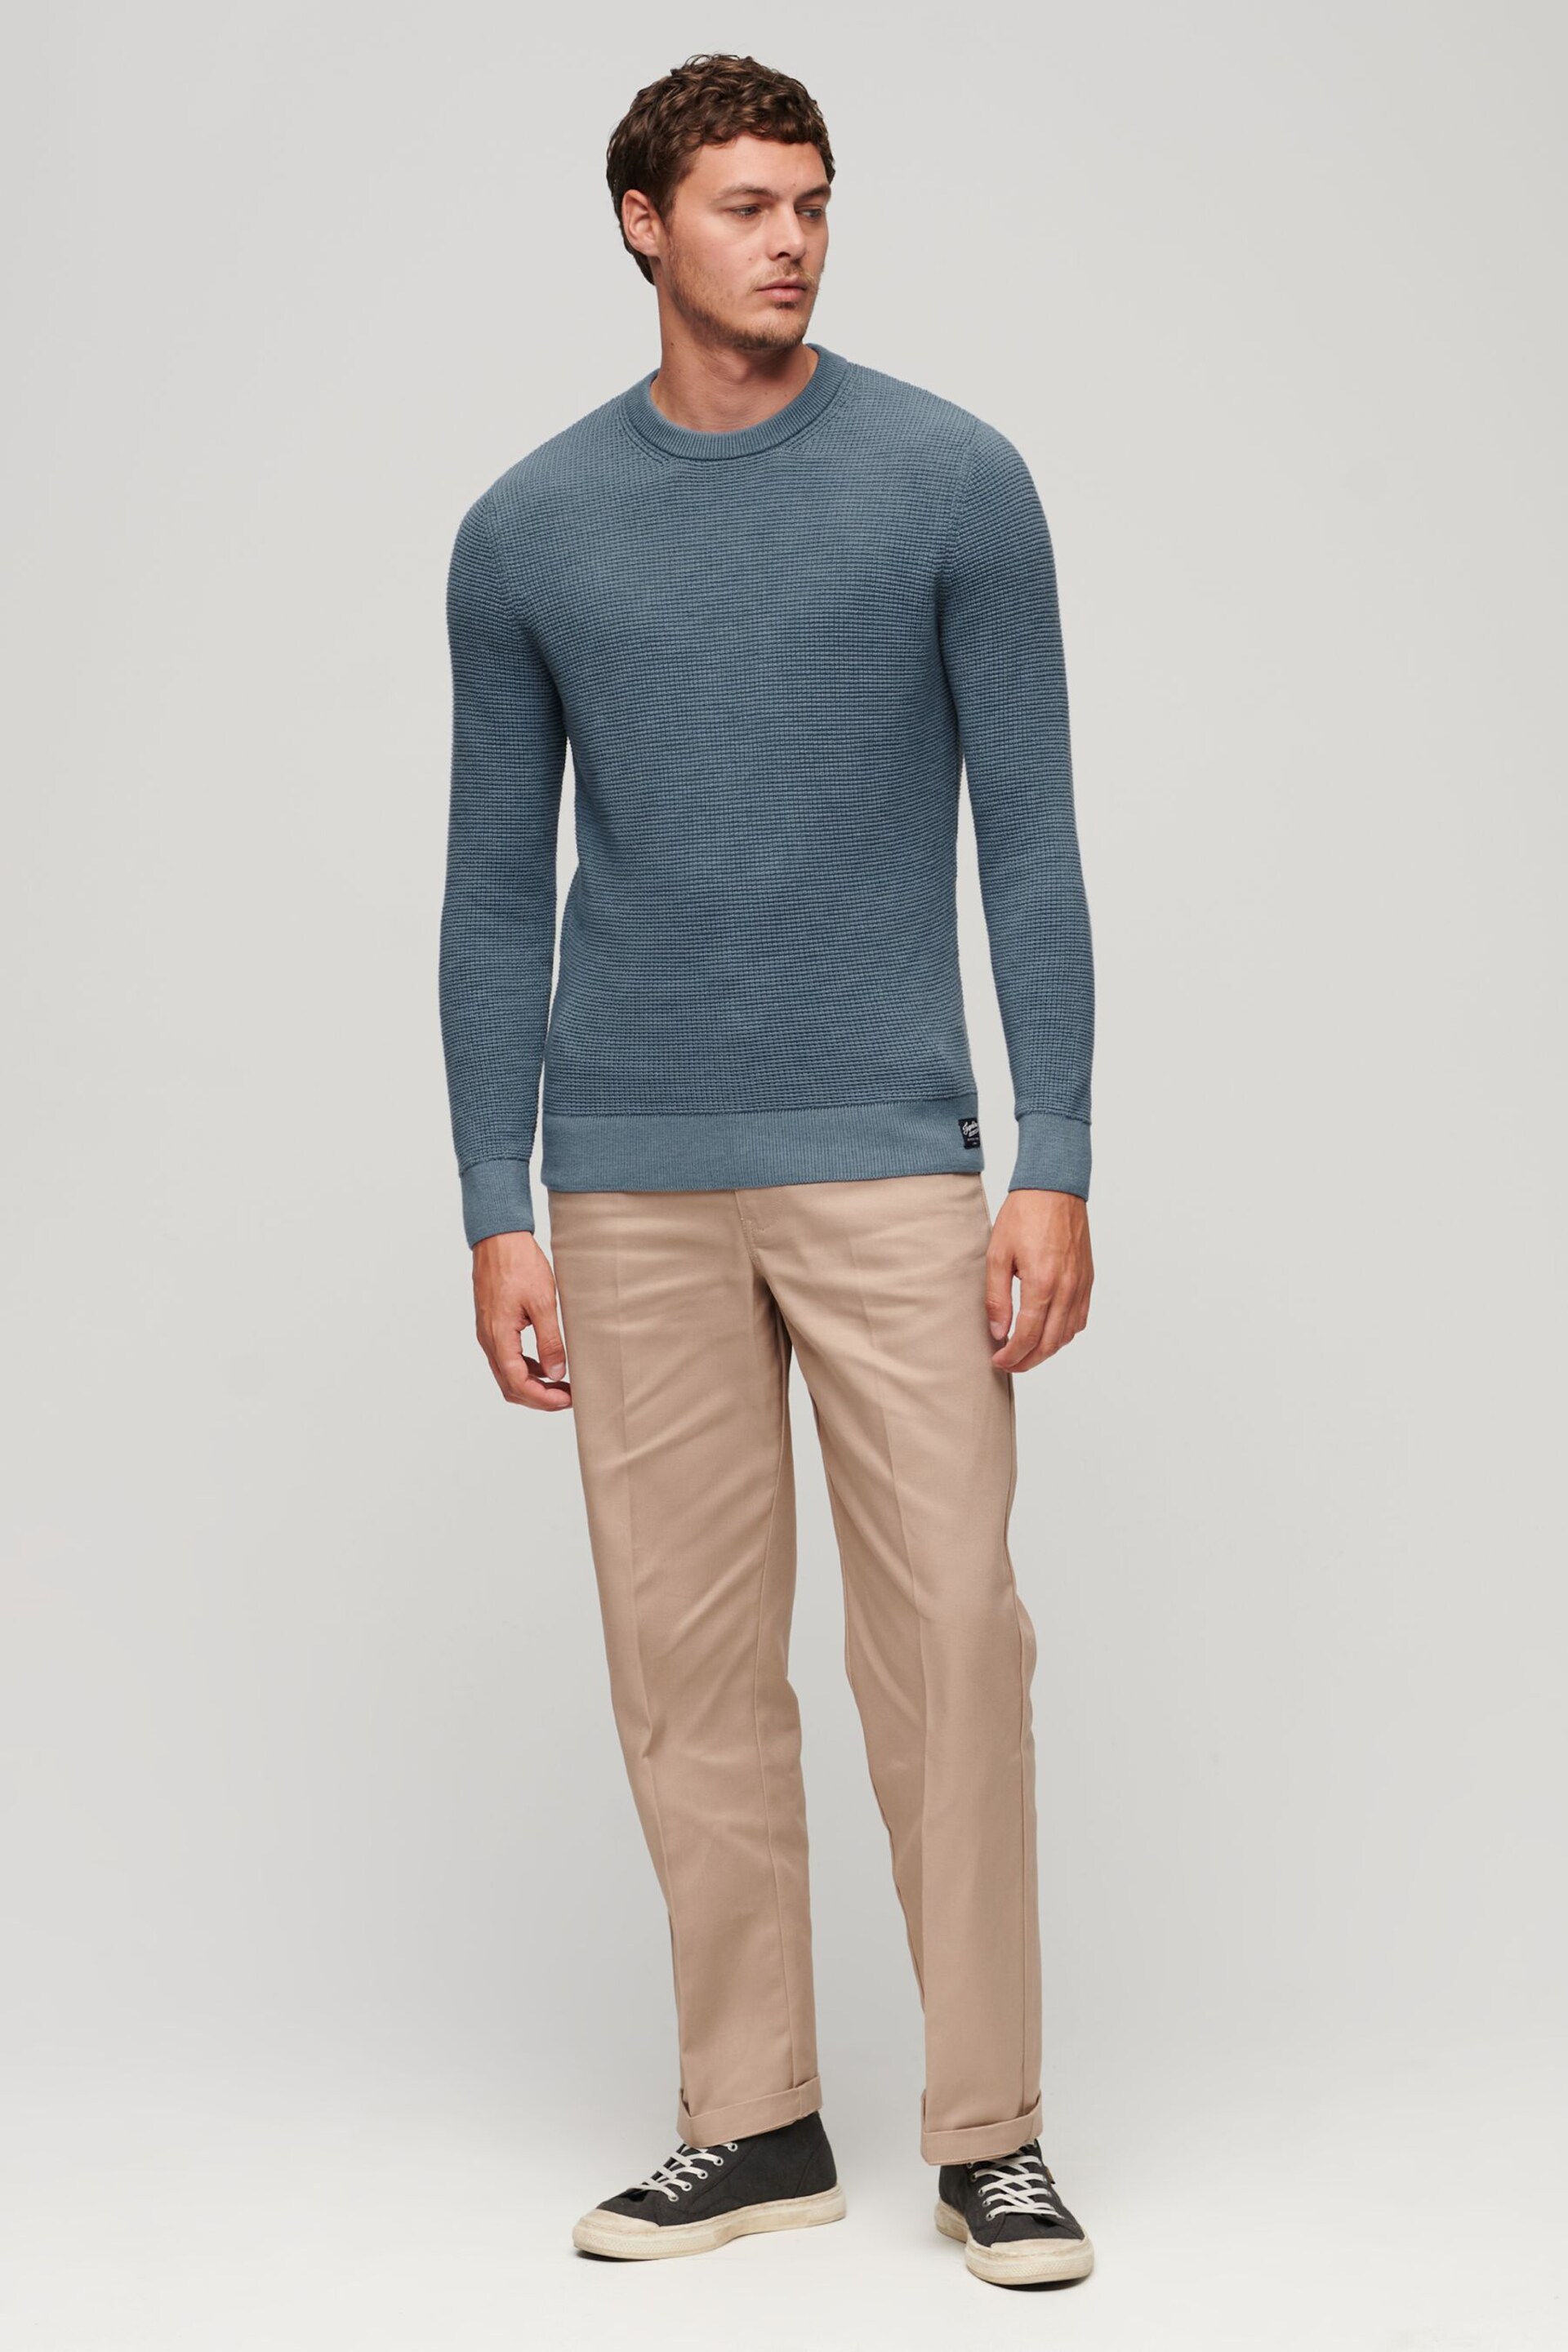 Superdry Blue Chrome Textured Crew Knit Jumper - Image 2 of 6